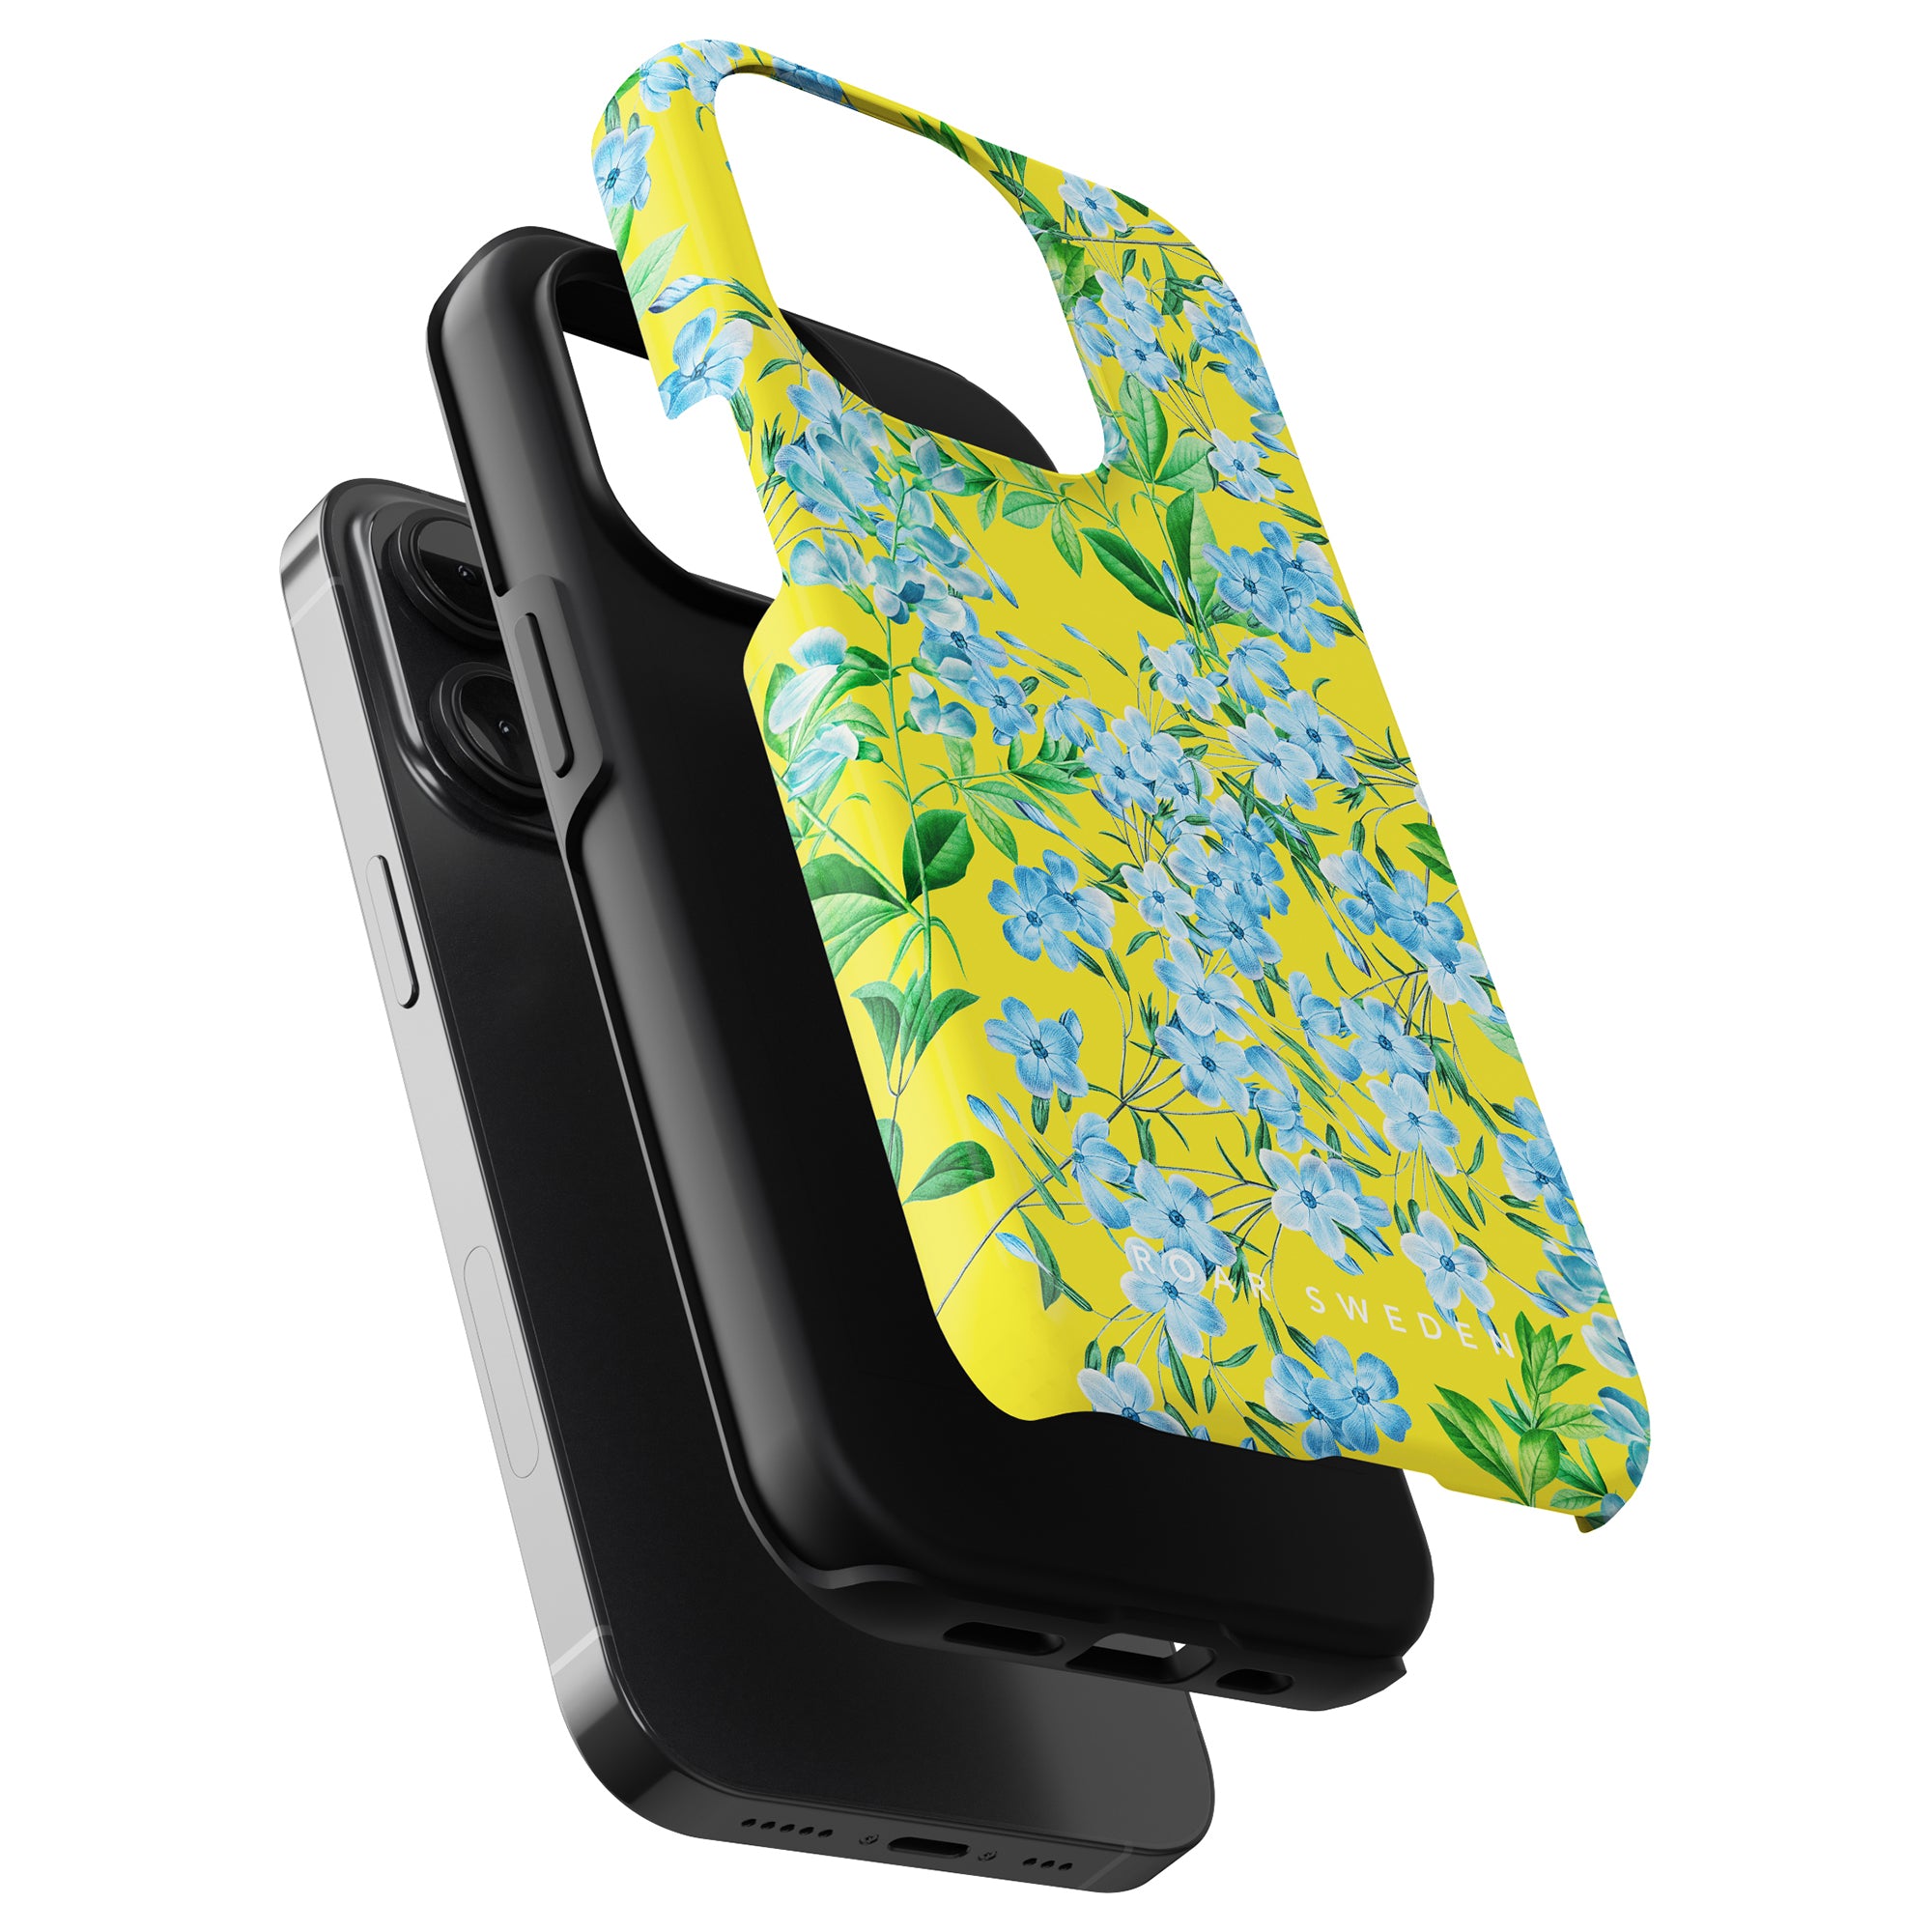 Two smartphones with black cases and a vibrant yellow and blue floral-patterned shopping bag feature a Spring Ditsy - Tough Case.